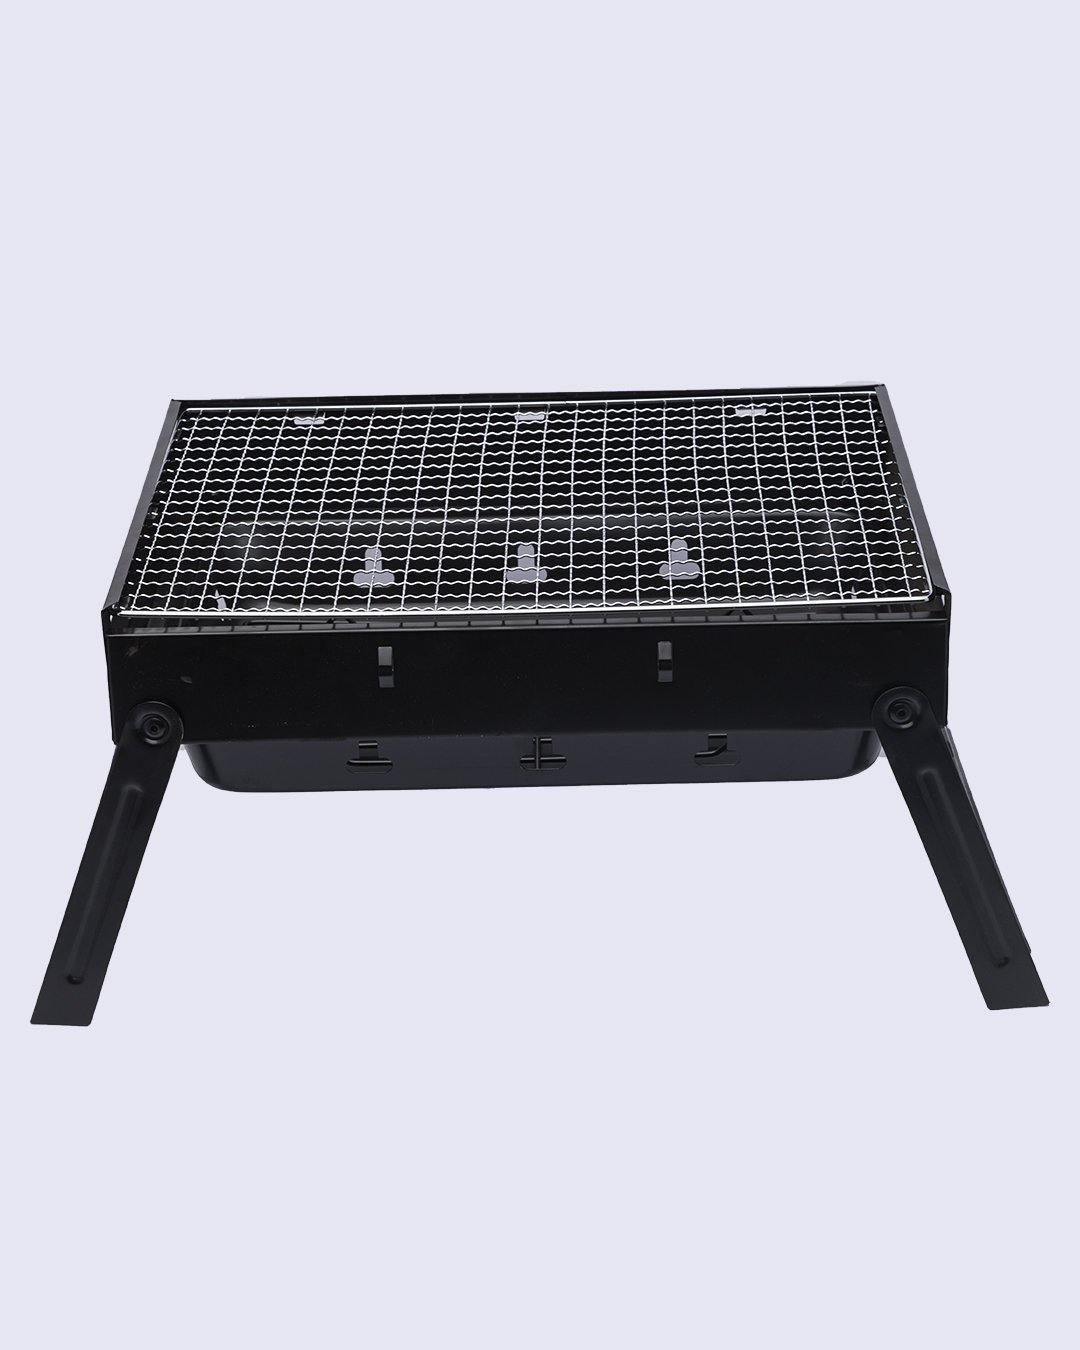 Barbecue Grill, Compact Design, for Cooking, Black, Iron - MARKET 99